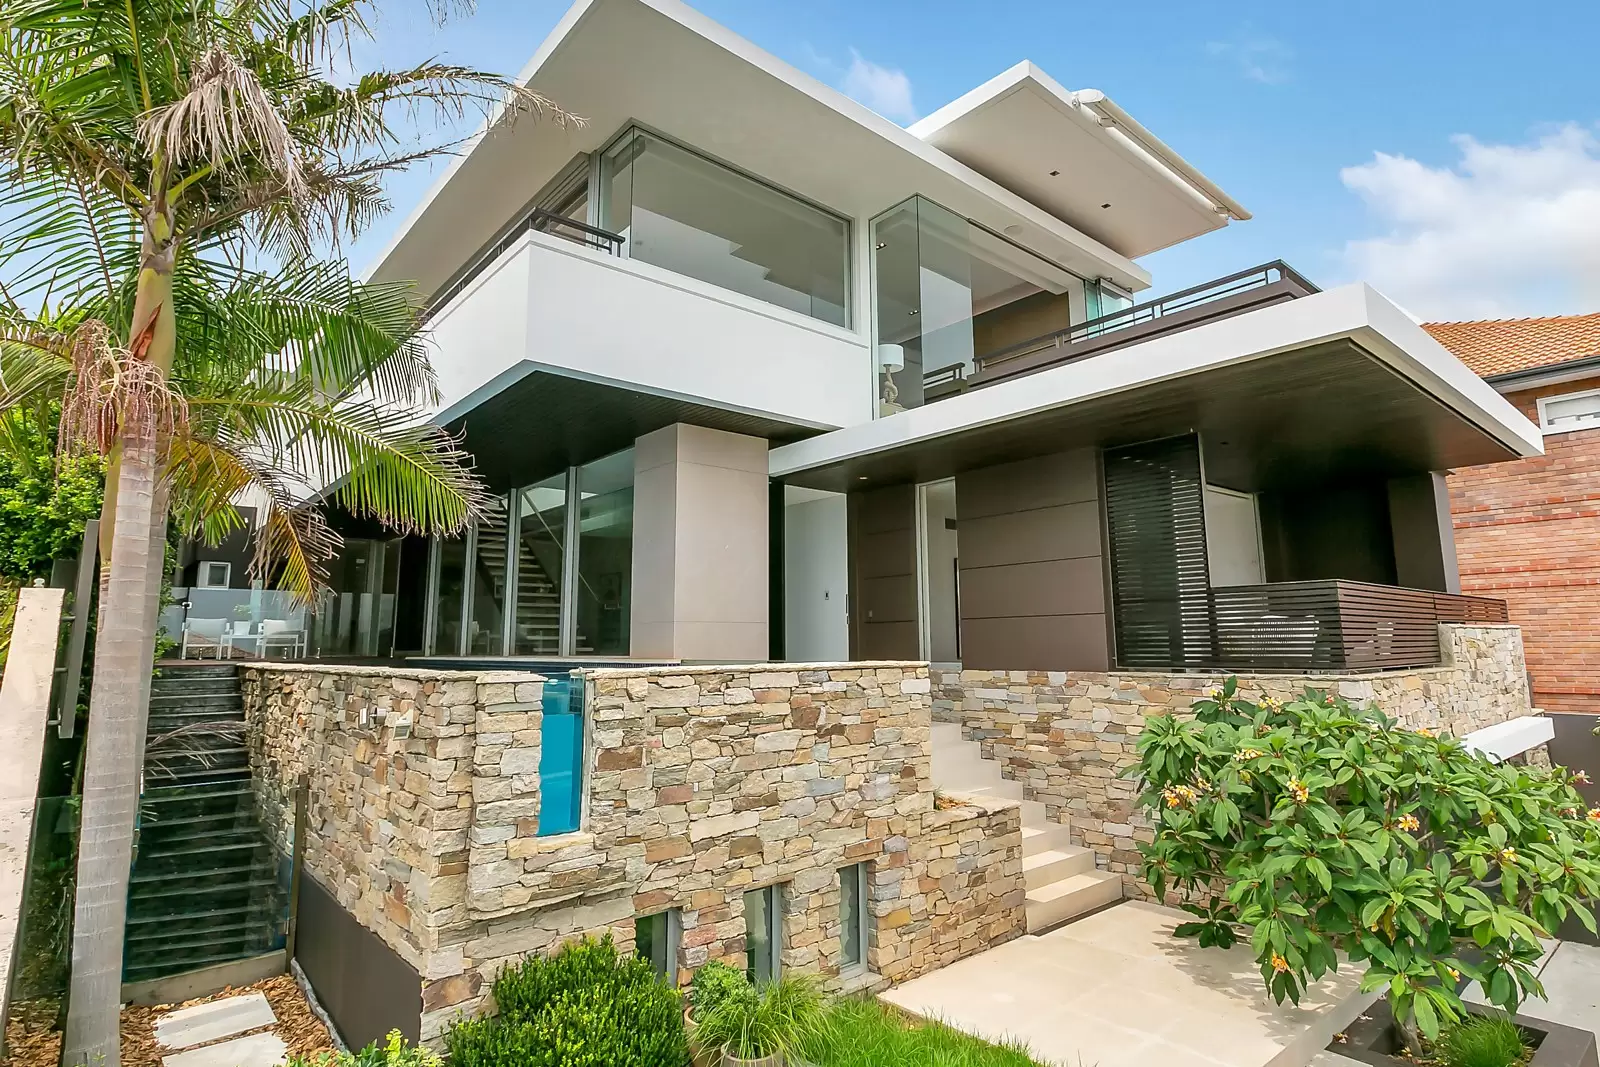 Photo #17: 37 Derby Street, Vaucluse - Sold by Sydney Sotheby's International Realty